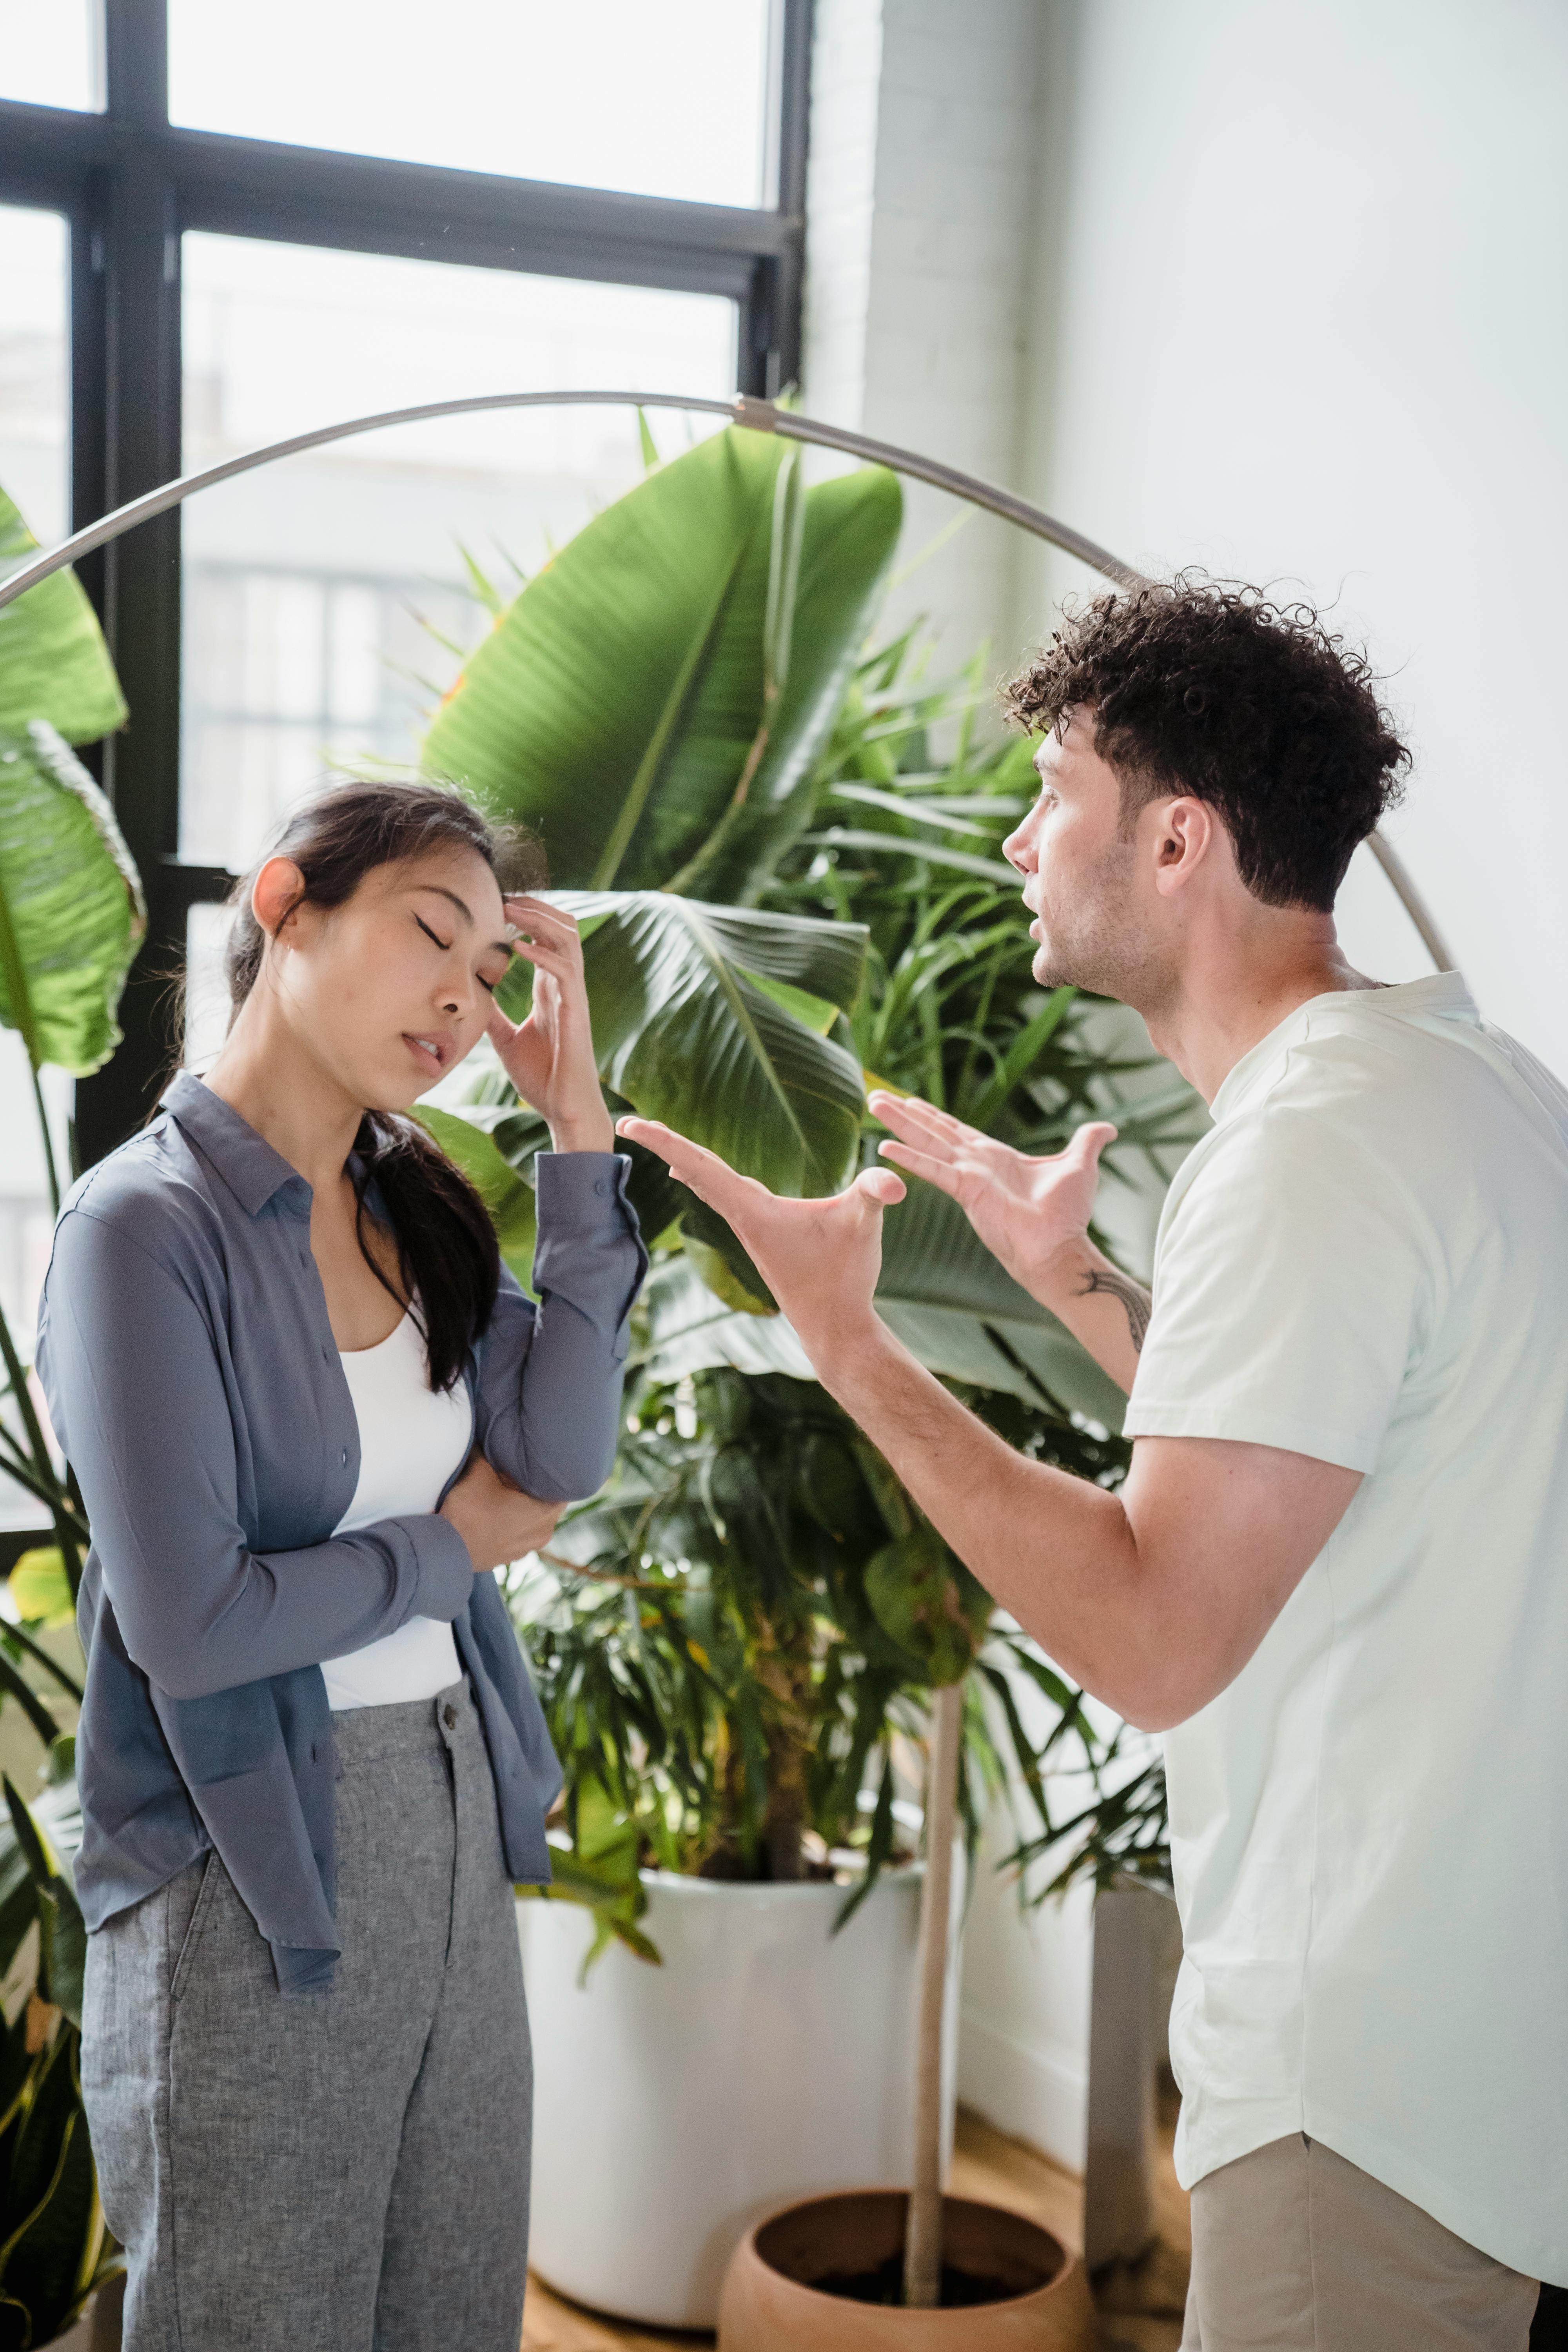 An angry man talking to a woman | Source: Pexels